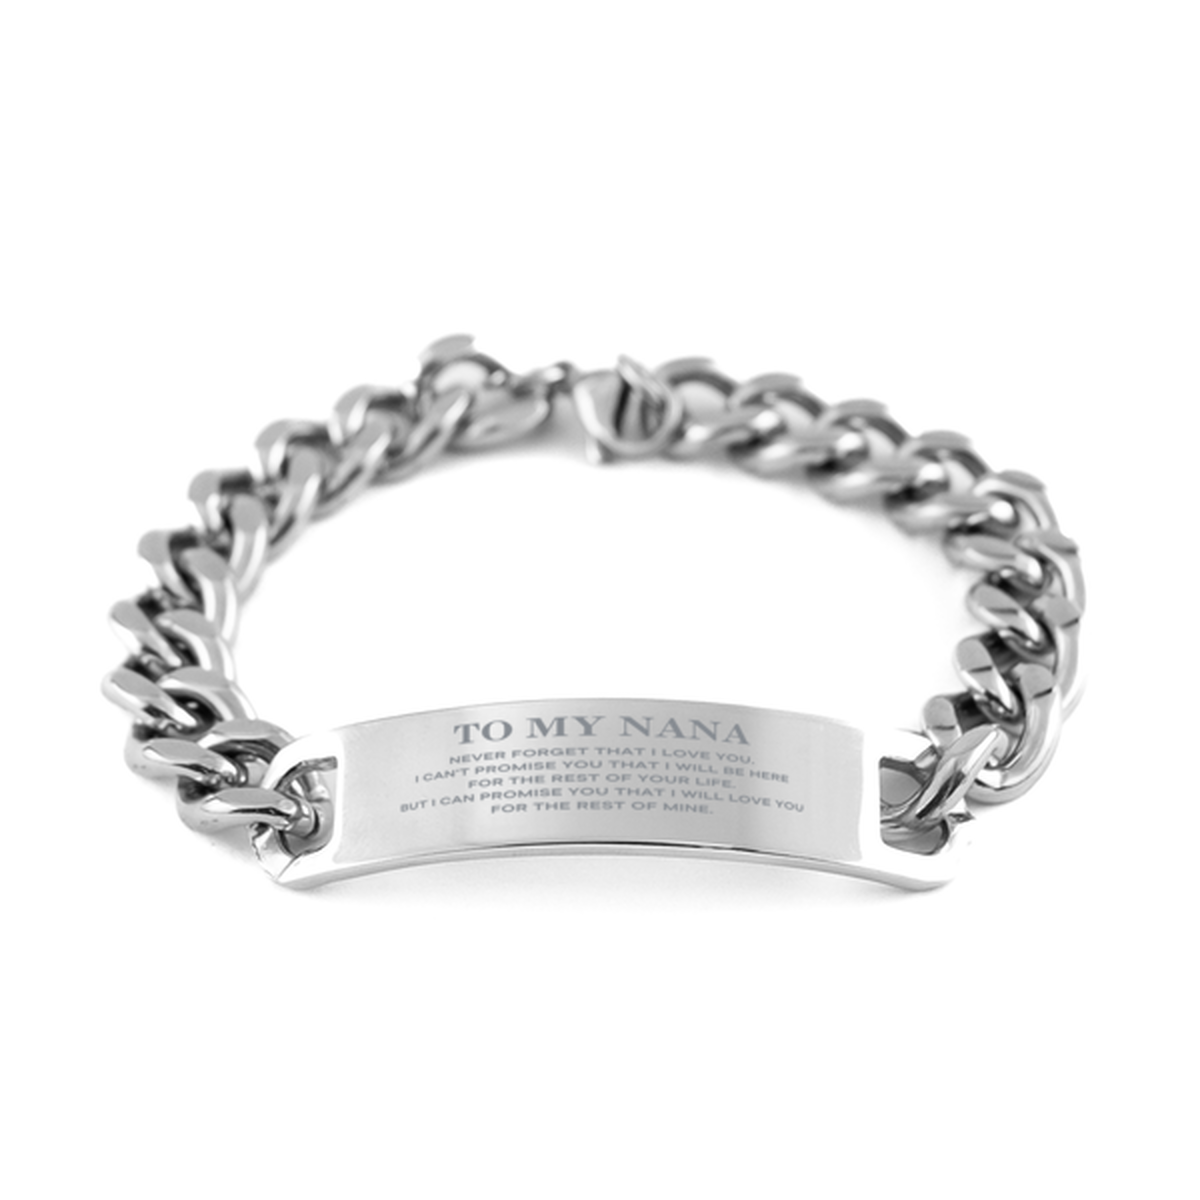 To My Nana Gifts, I will love you for the rest of mine, Love Nana Bracelet, Birthday Christmas Unique Cuban Chain Stainless Steel Bracelet For Nana